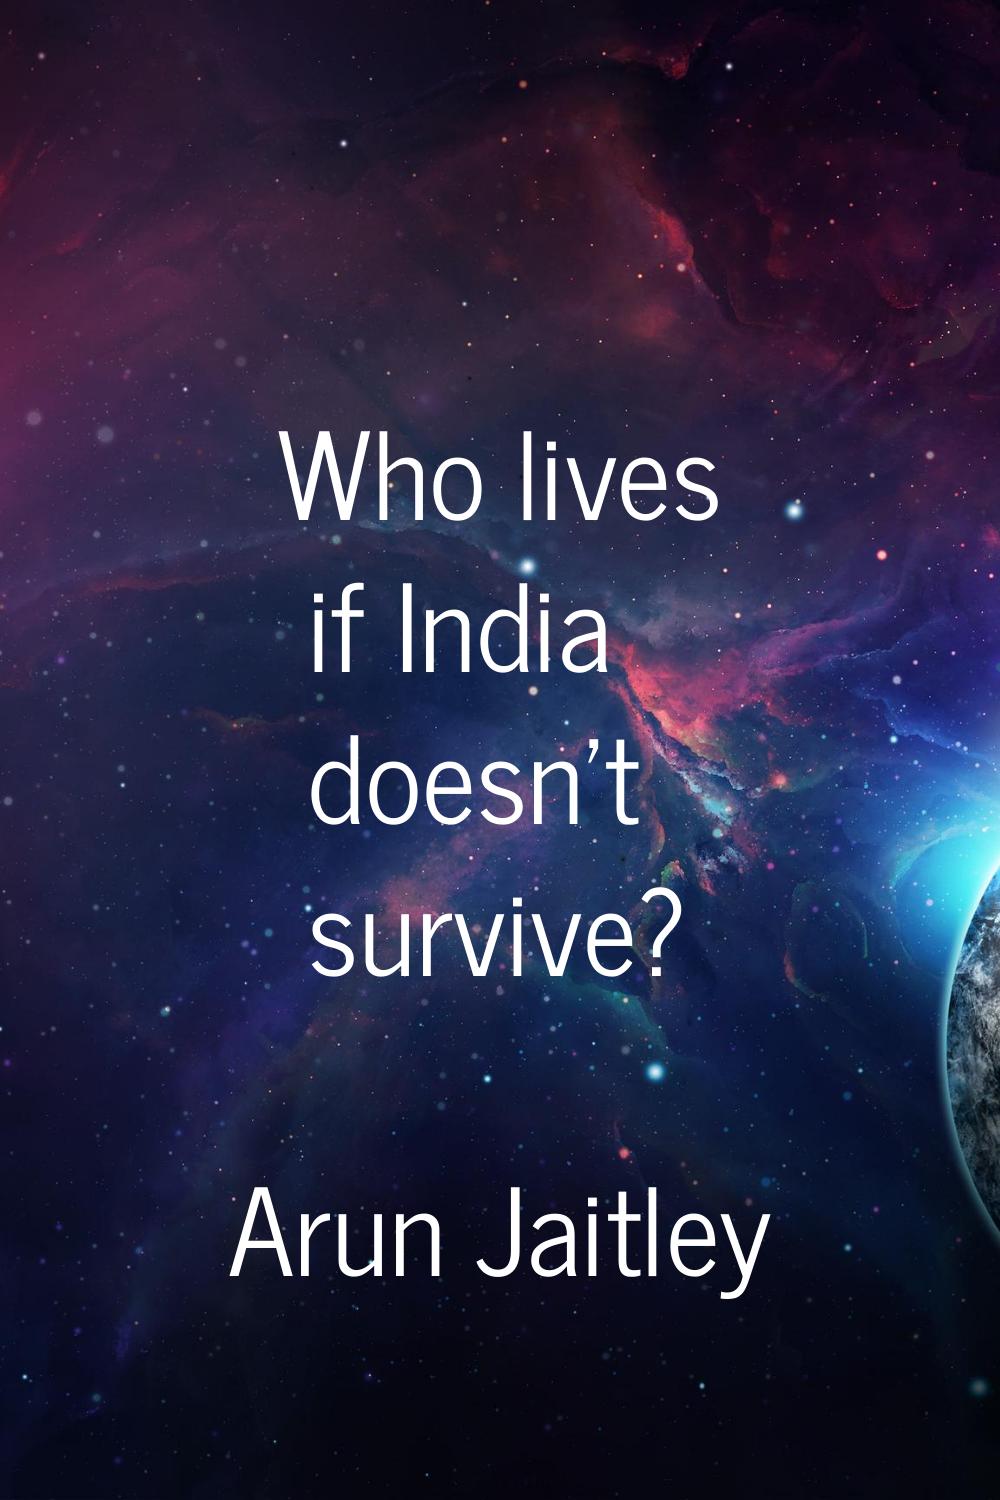 Who lives if India doesn't survive?